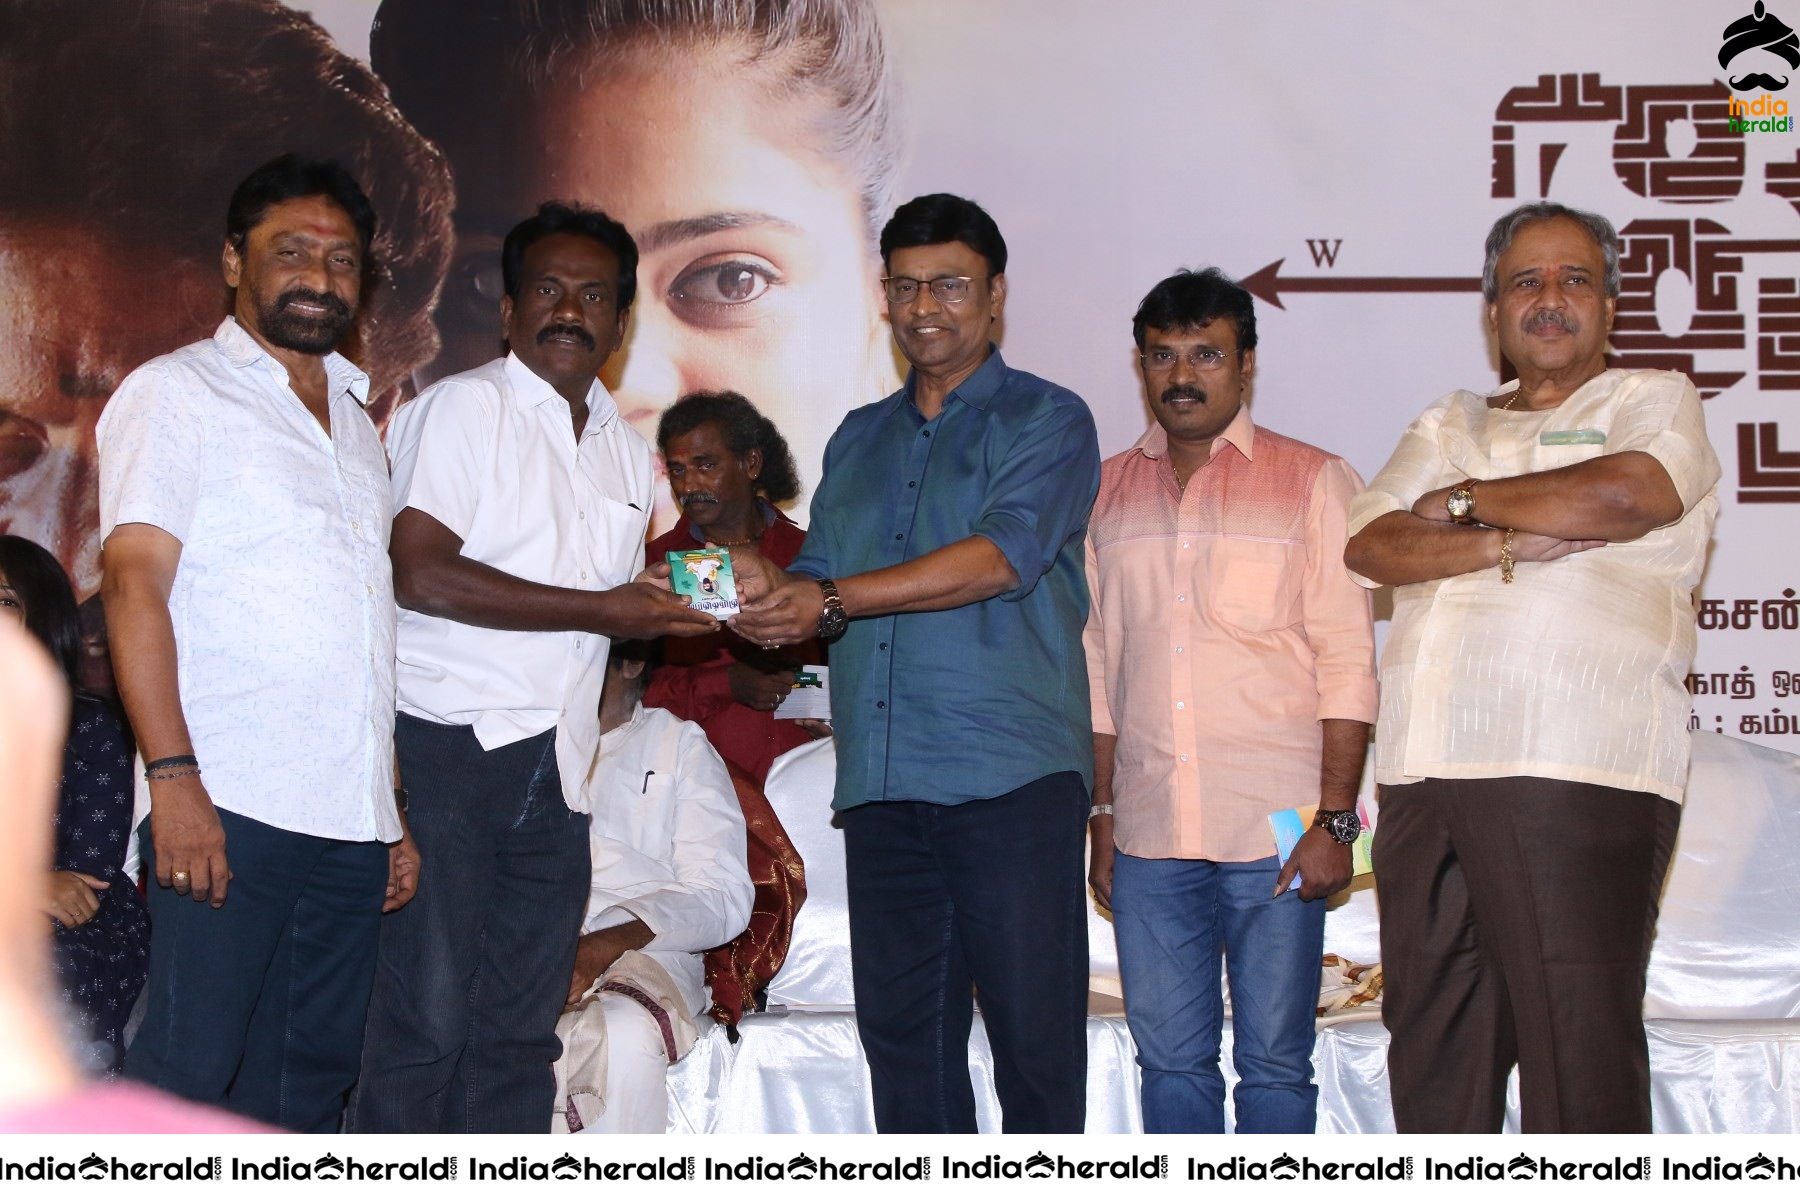 More Photos from Thedu Audio Launch and Trailer event Set 2